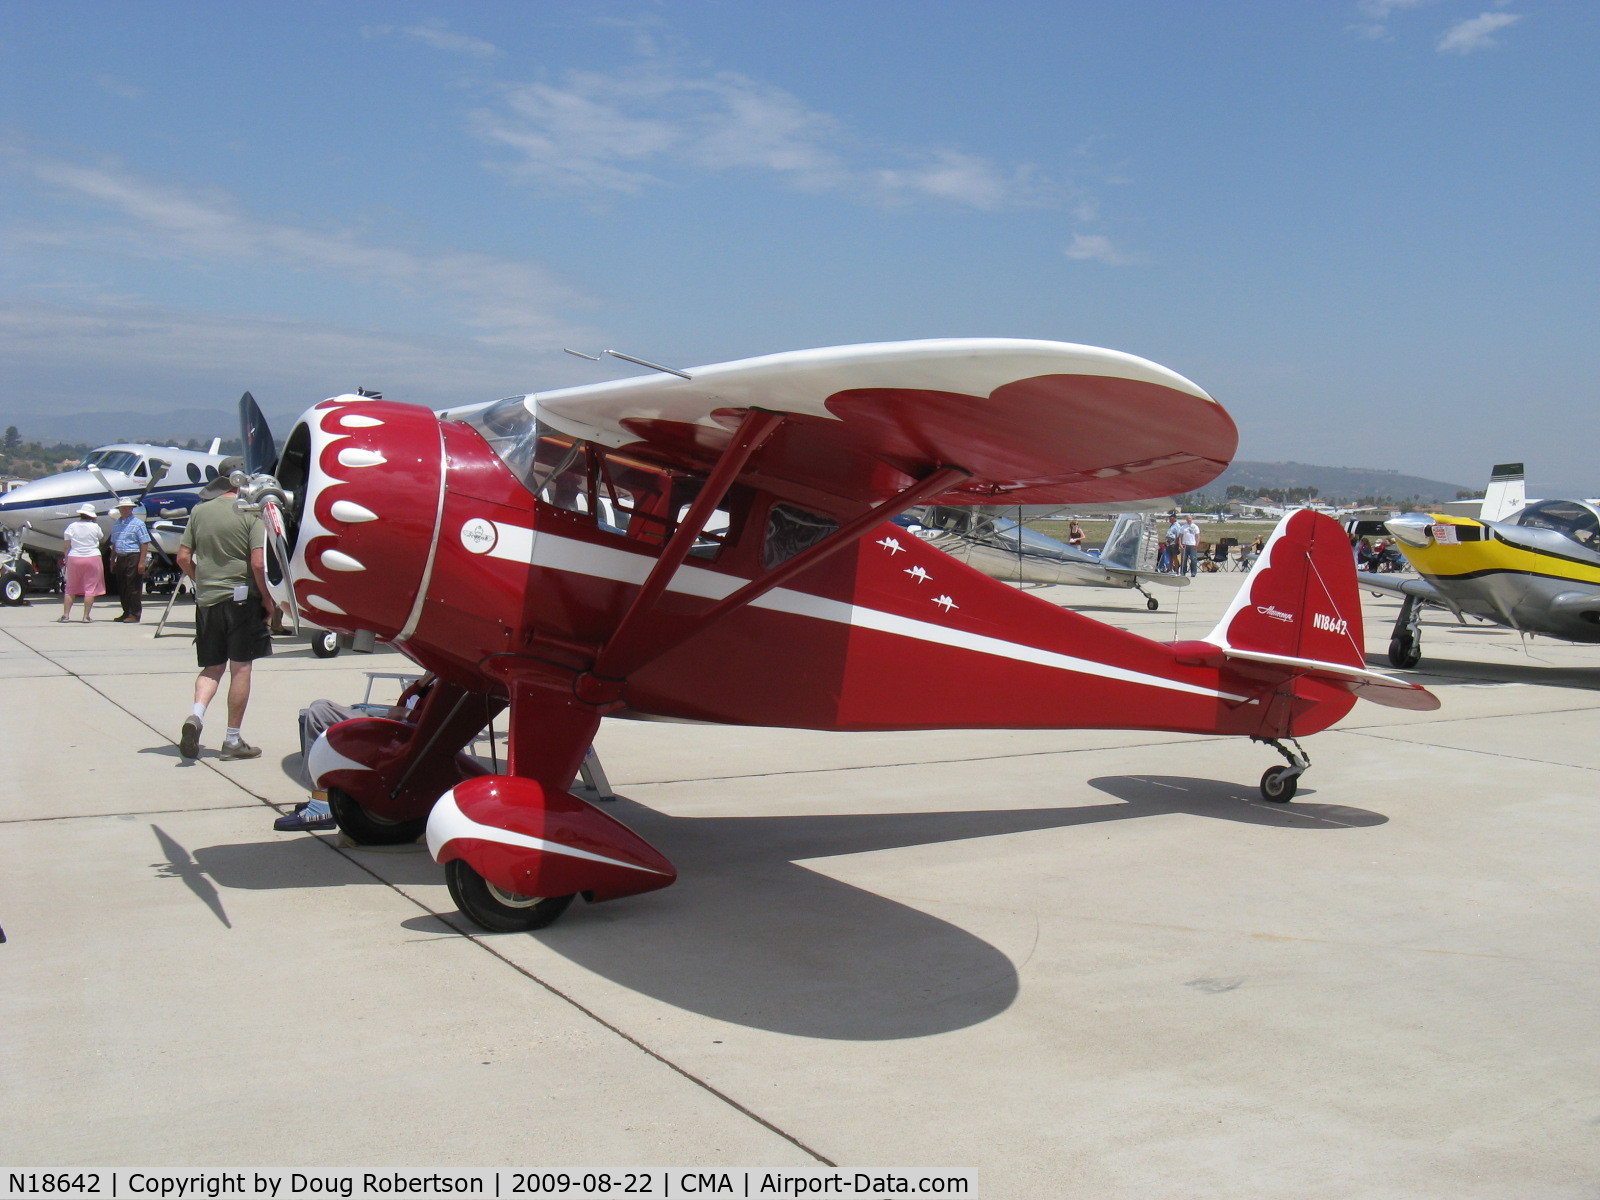 N18642, 1933 Monocoupe 110 C/N 6W53, 1933 MONOCOUPE 110, Warner Scarab 145 Hp radial, one of the prettiest classic aircraft